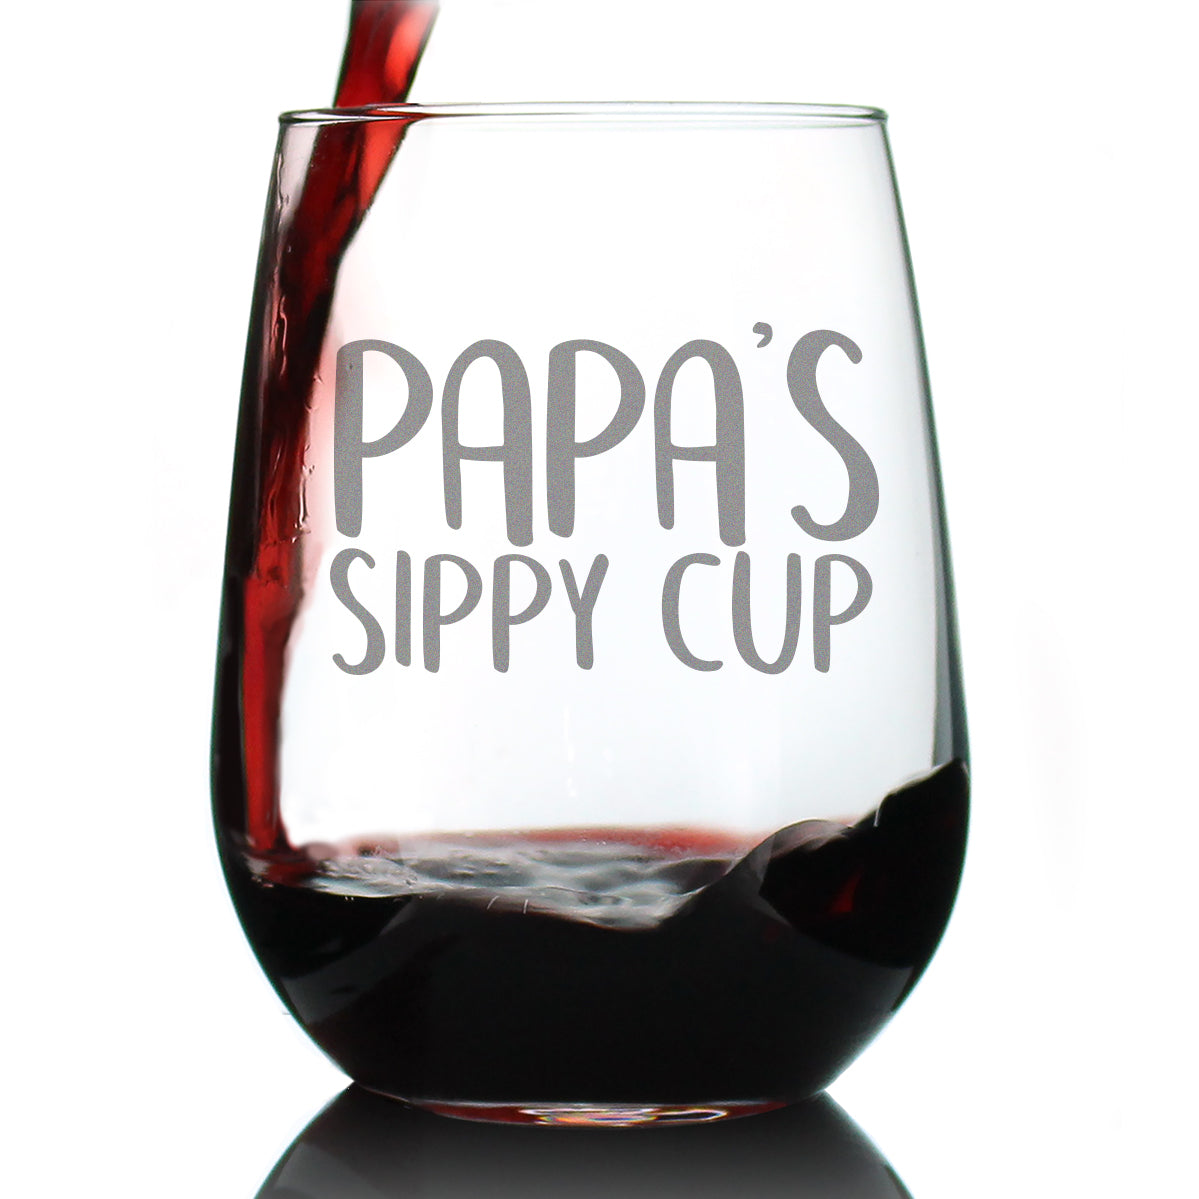 The Large Wine Sippy Cup